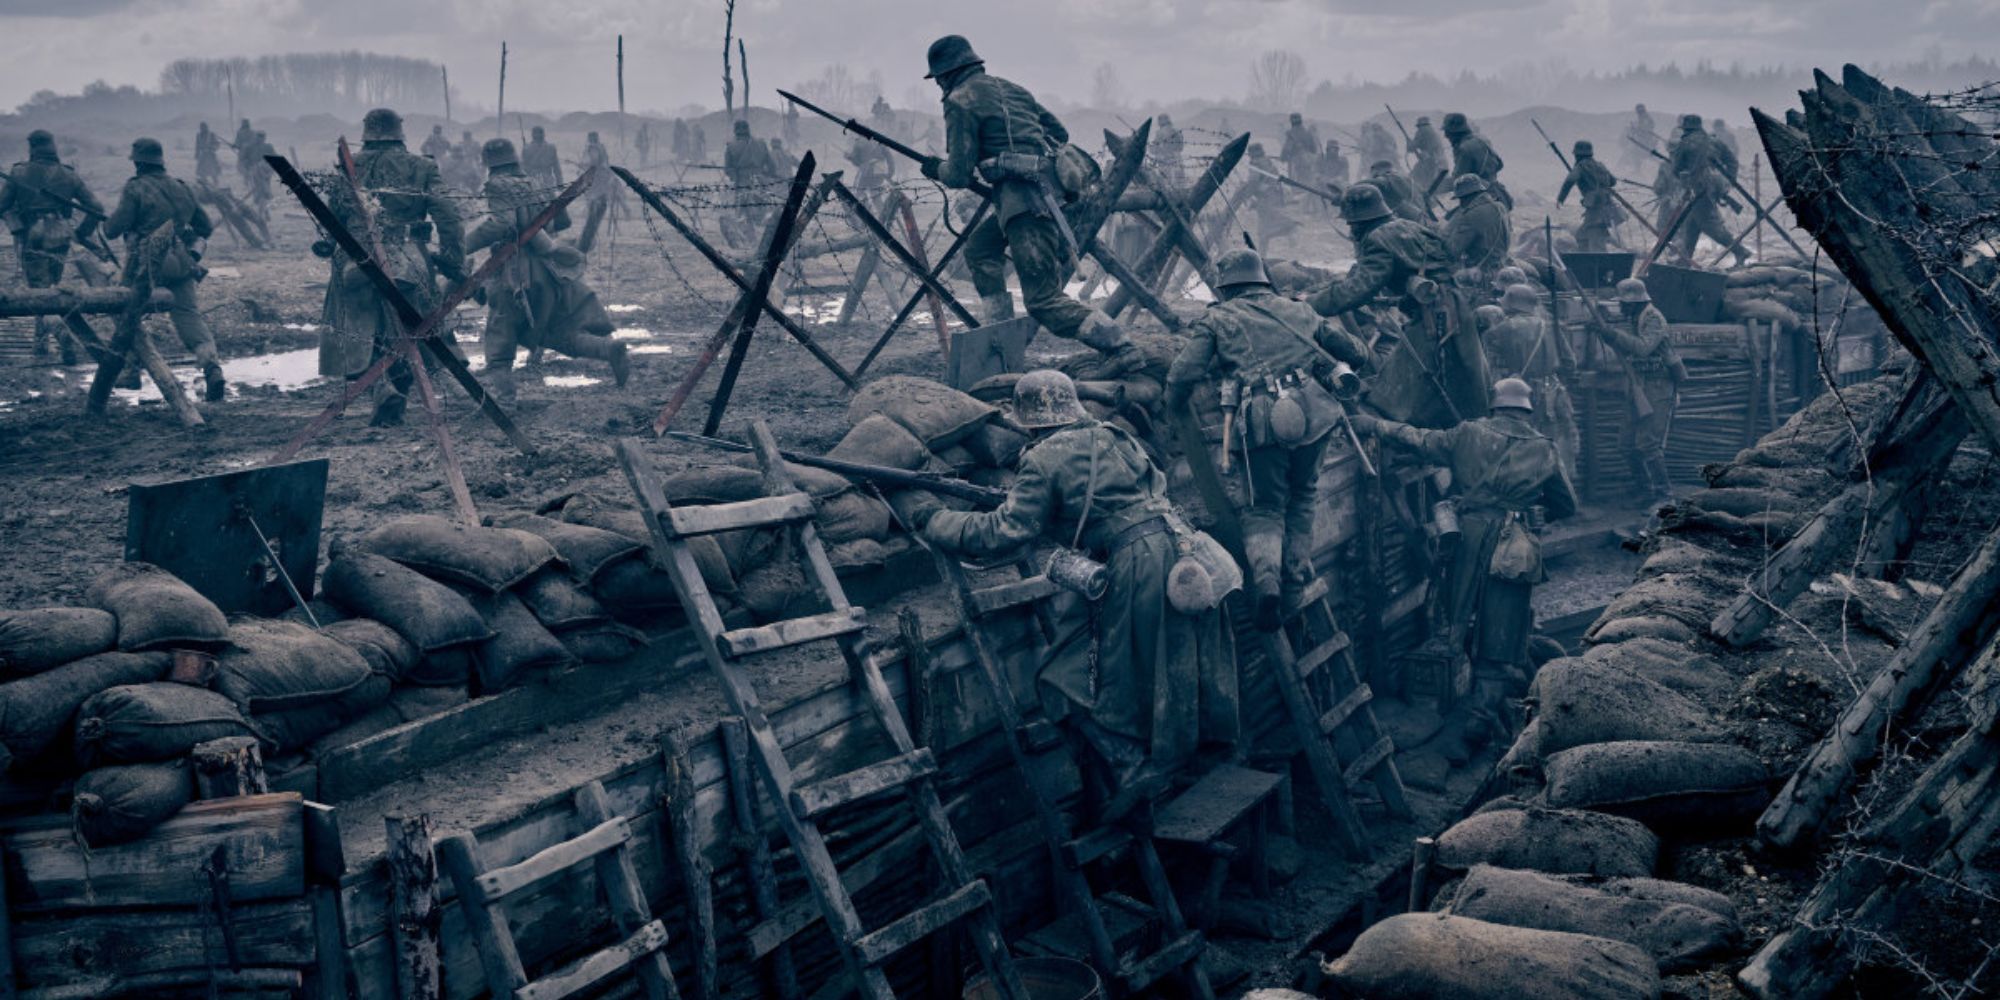 German soldiers emerge from the trenches into a charge